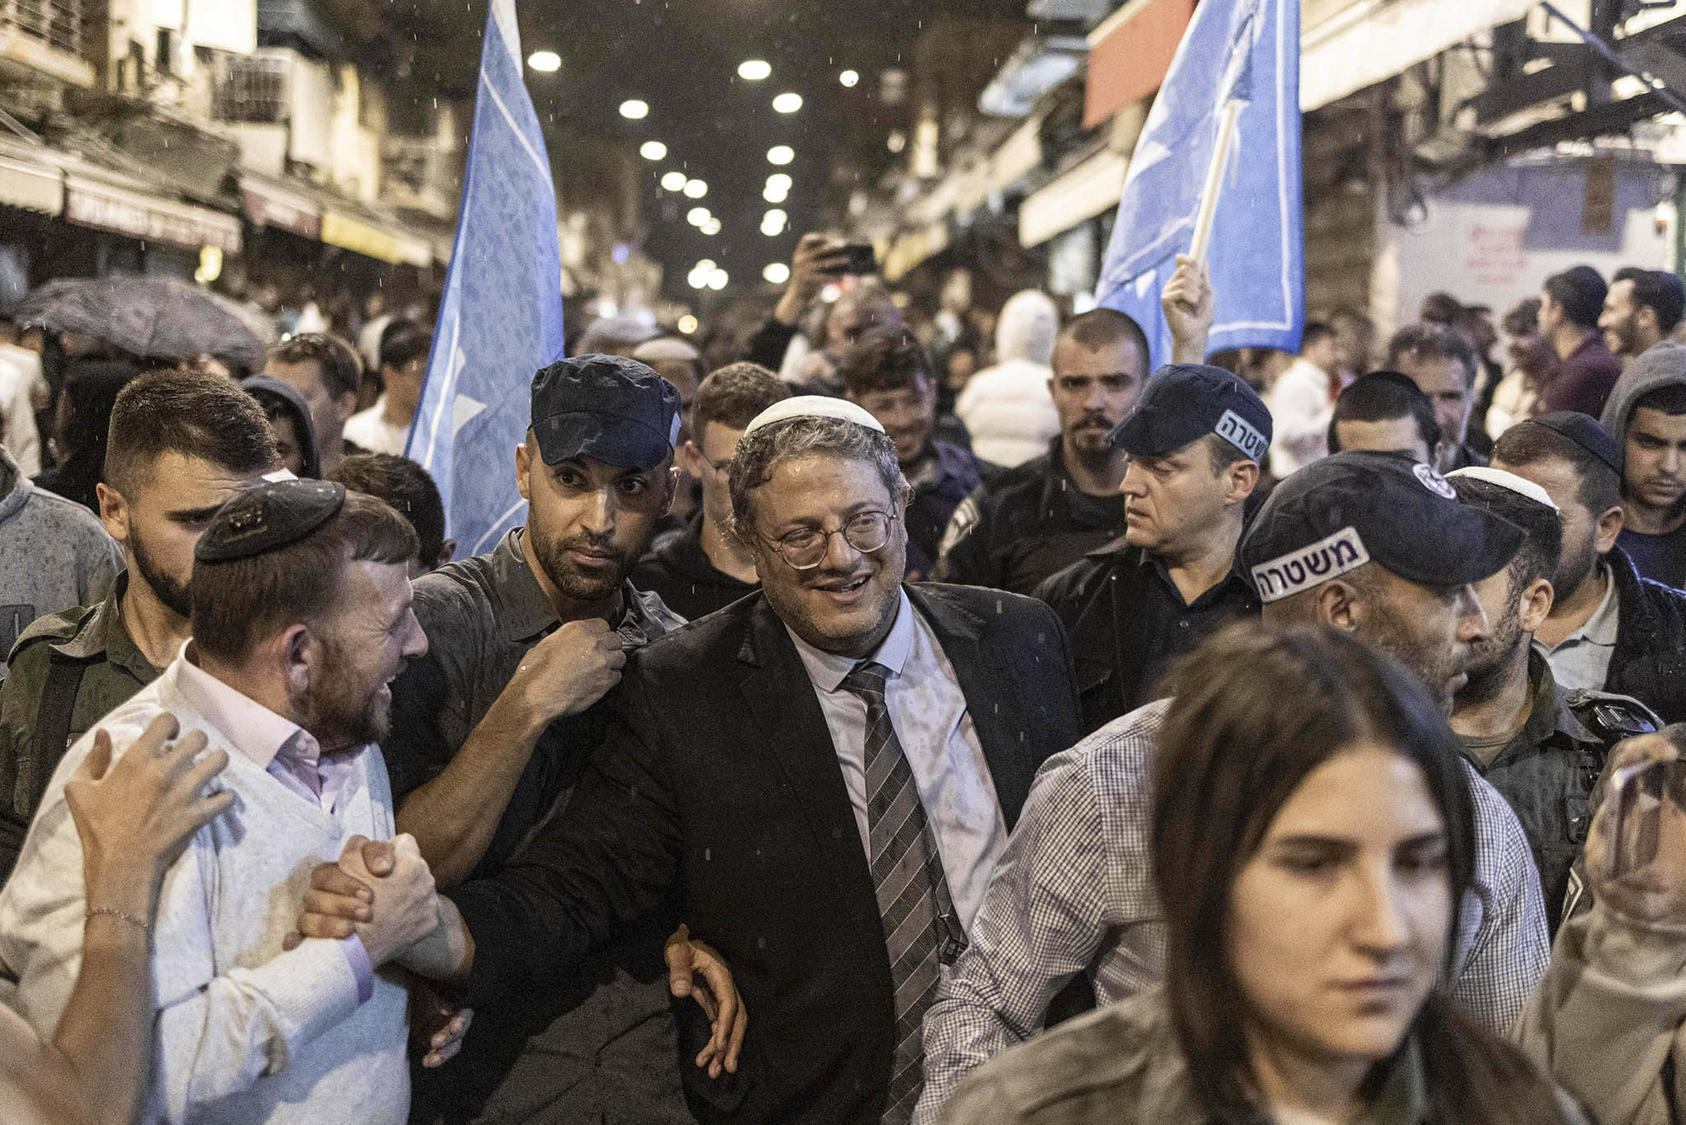 Itamar Ben-Gvir, the leader of the ultra-nationalist party Jewish Power and the new national security minister, campaigning in Jerusalem on Oct. 20, 2022. (Avishag Shaar-Yashuv/The New York Times)